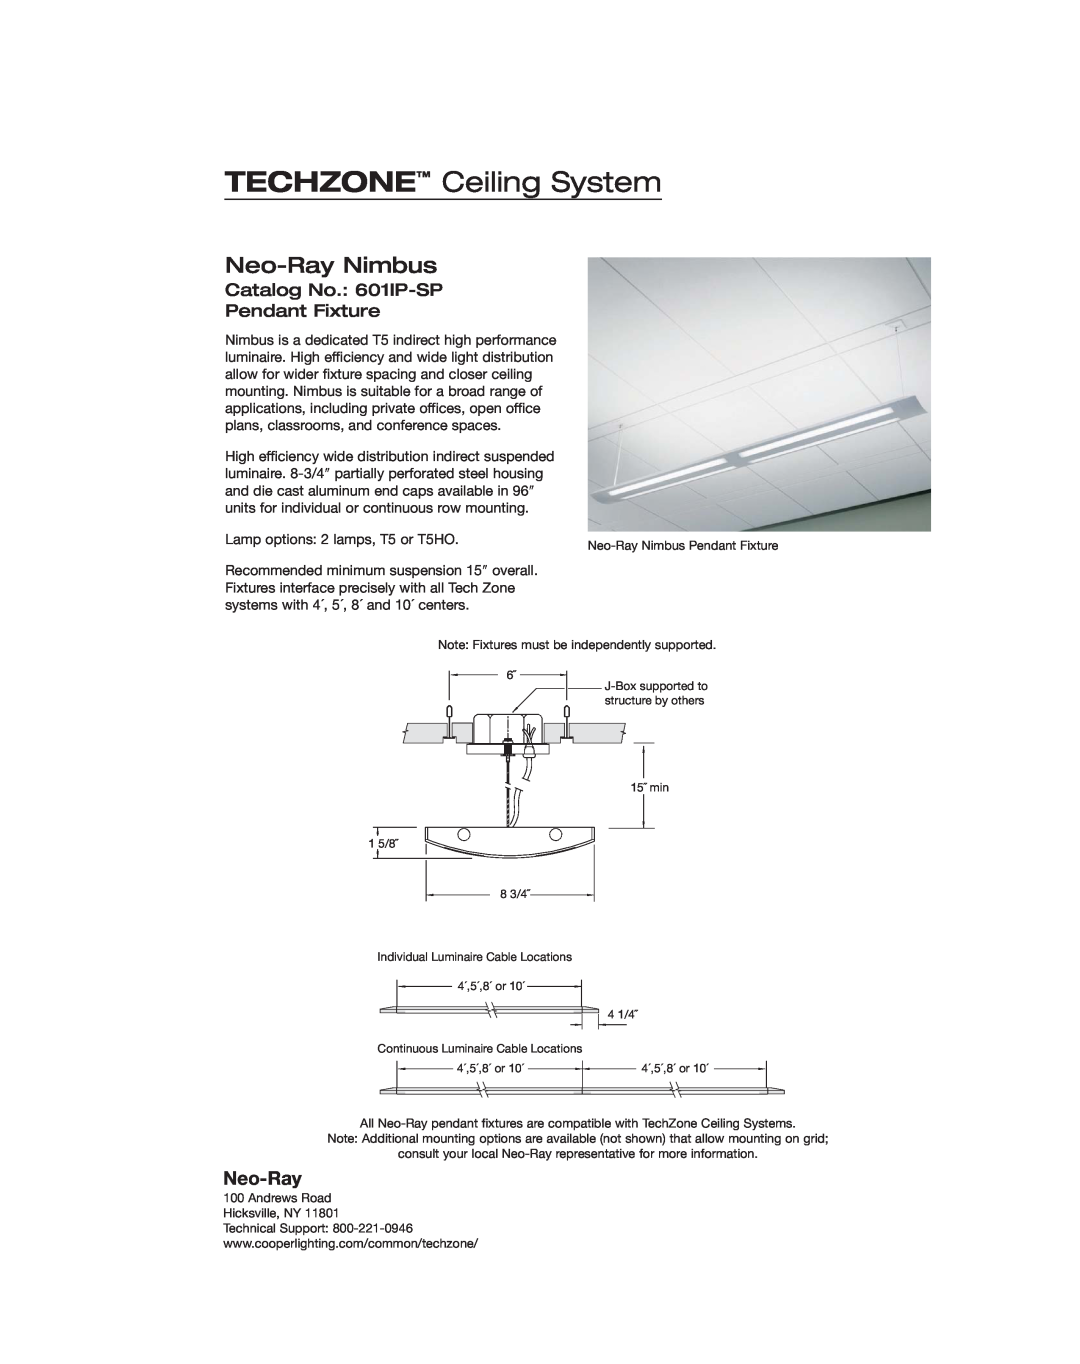 Armstrong World Industries 7A-660R, 7A-648R Neo-RayNimbus, Catalog No. 601IP-SP, Pendant Fixture, TECHZONE Ceiling System 